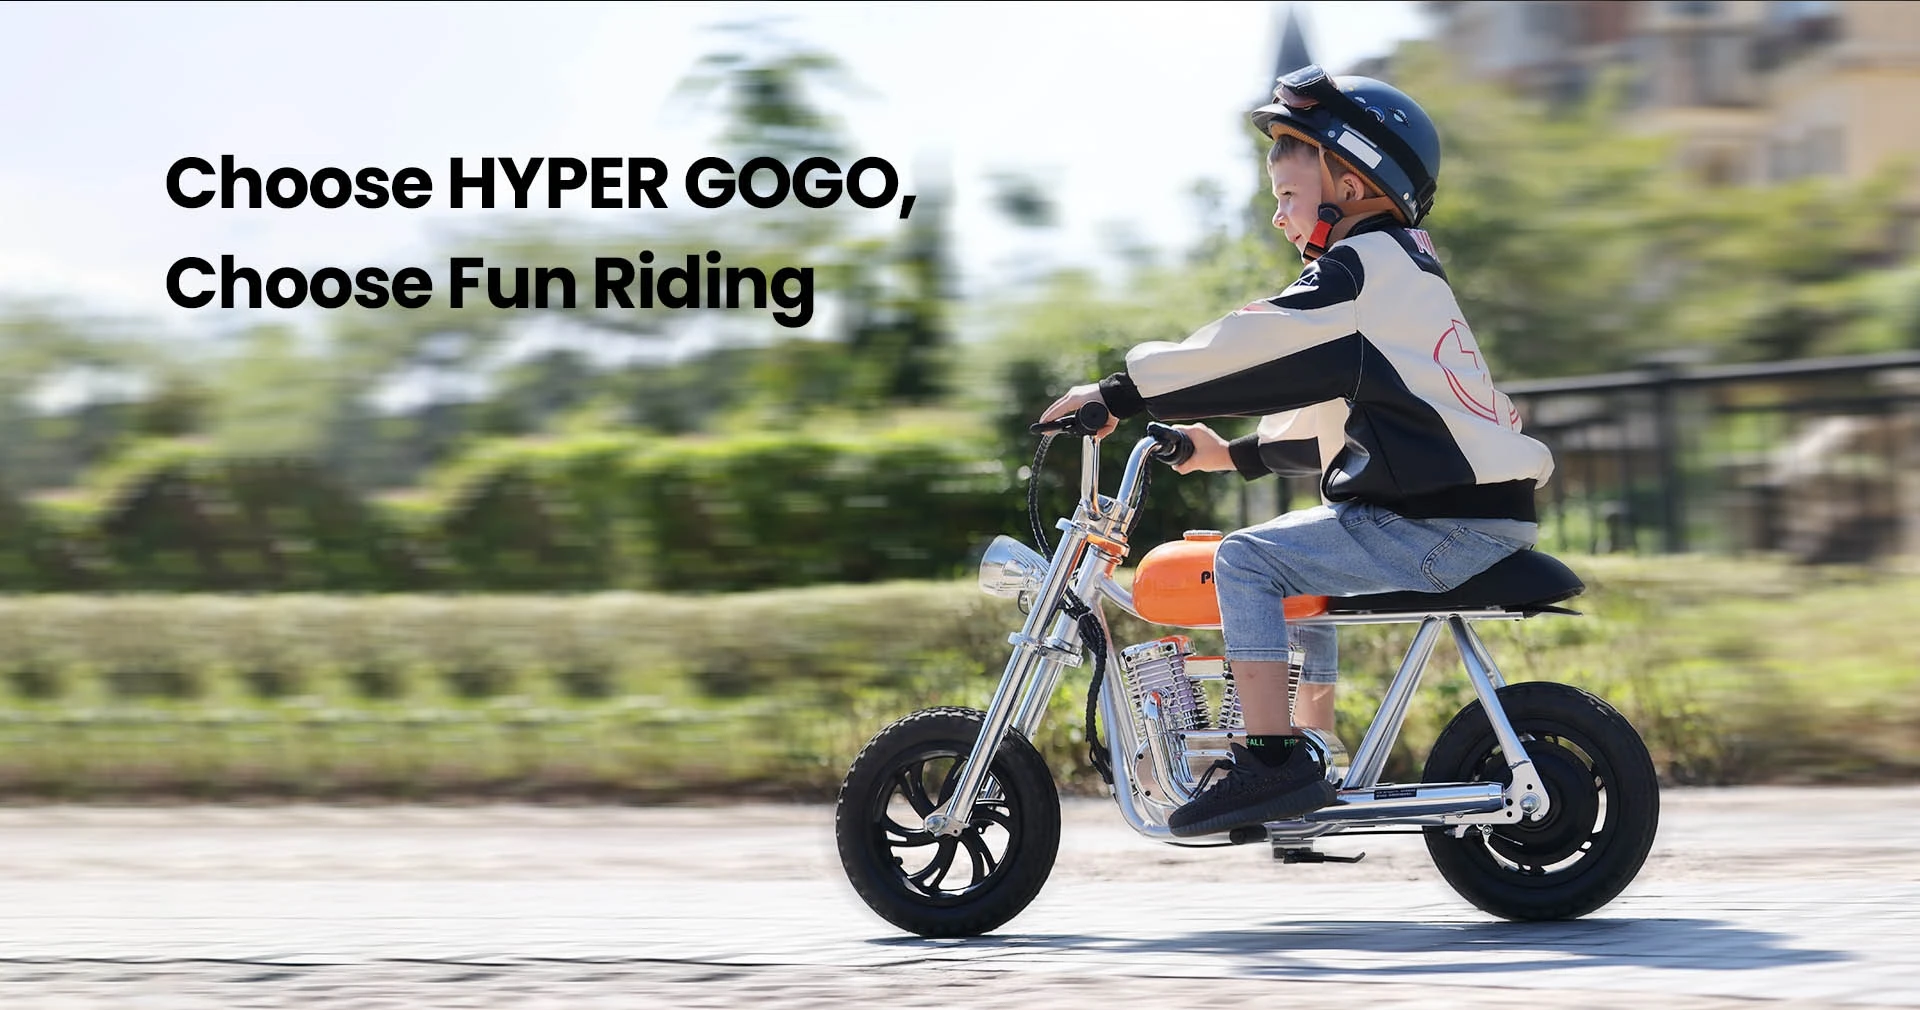 HYPER GOGO Pioneer 12 Plus with App Electric Motorcycle for Kids, 24V 5.2Ah 160W with 12'x3' Tires, 12KM Top Range - Blue